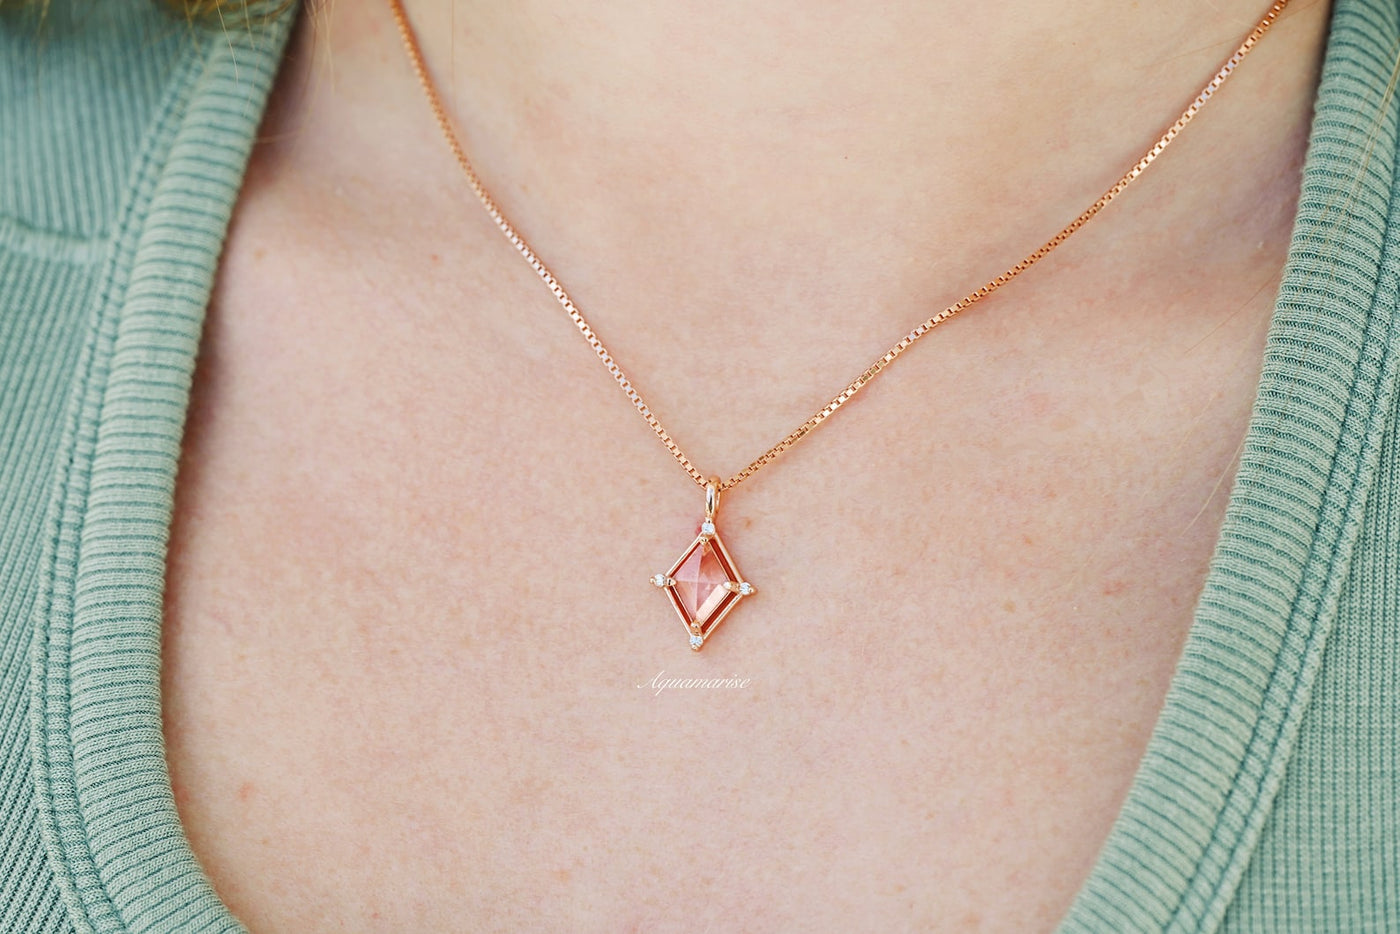 Unique Kite Morganite Necklace For Women 14K Rose Gold Vermeil Blush Pink Minimalist Pendant Birthstone Jewelry Anniversary Gift For Her